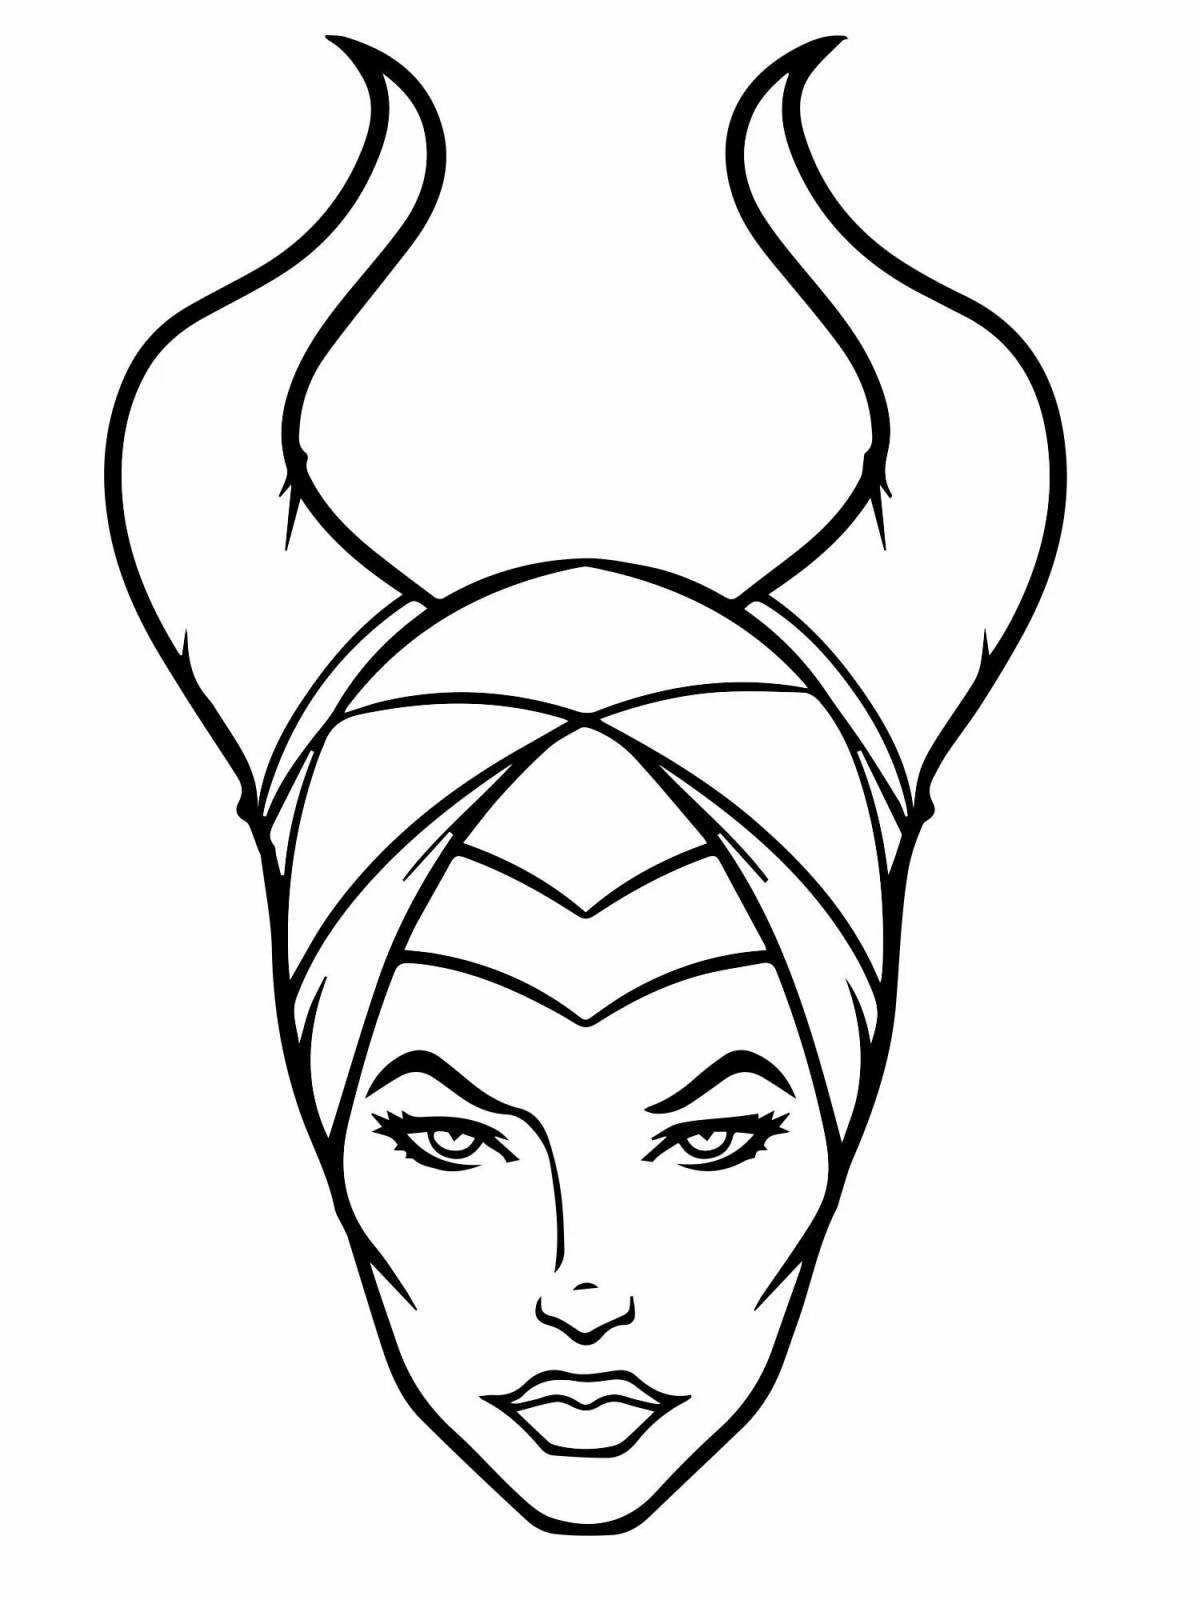 Amazing maleficent coloring book for kids